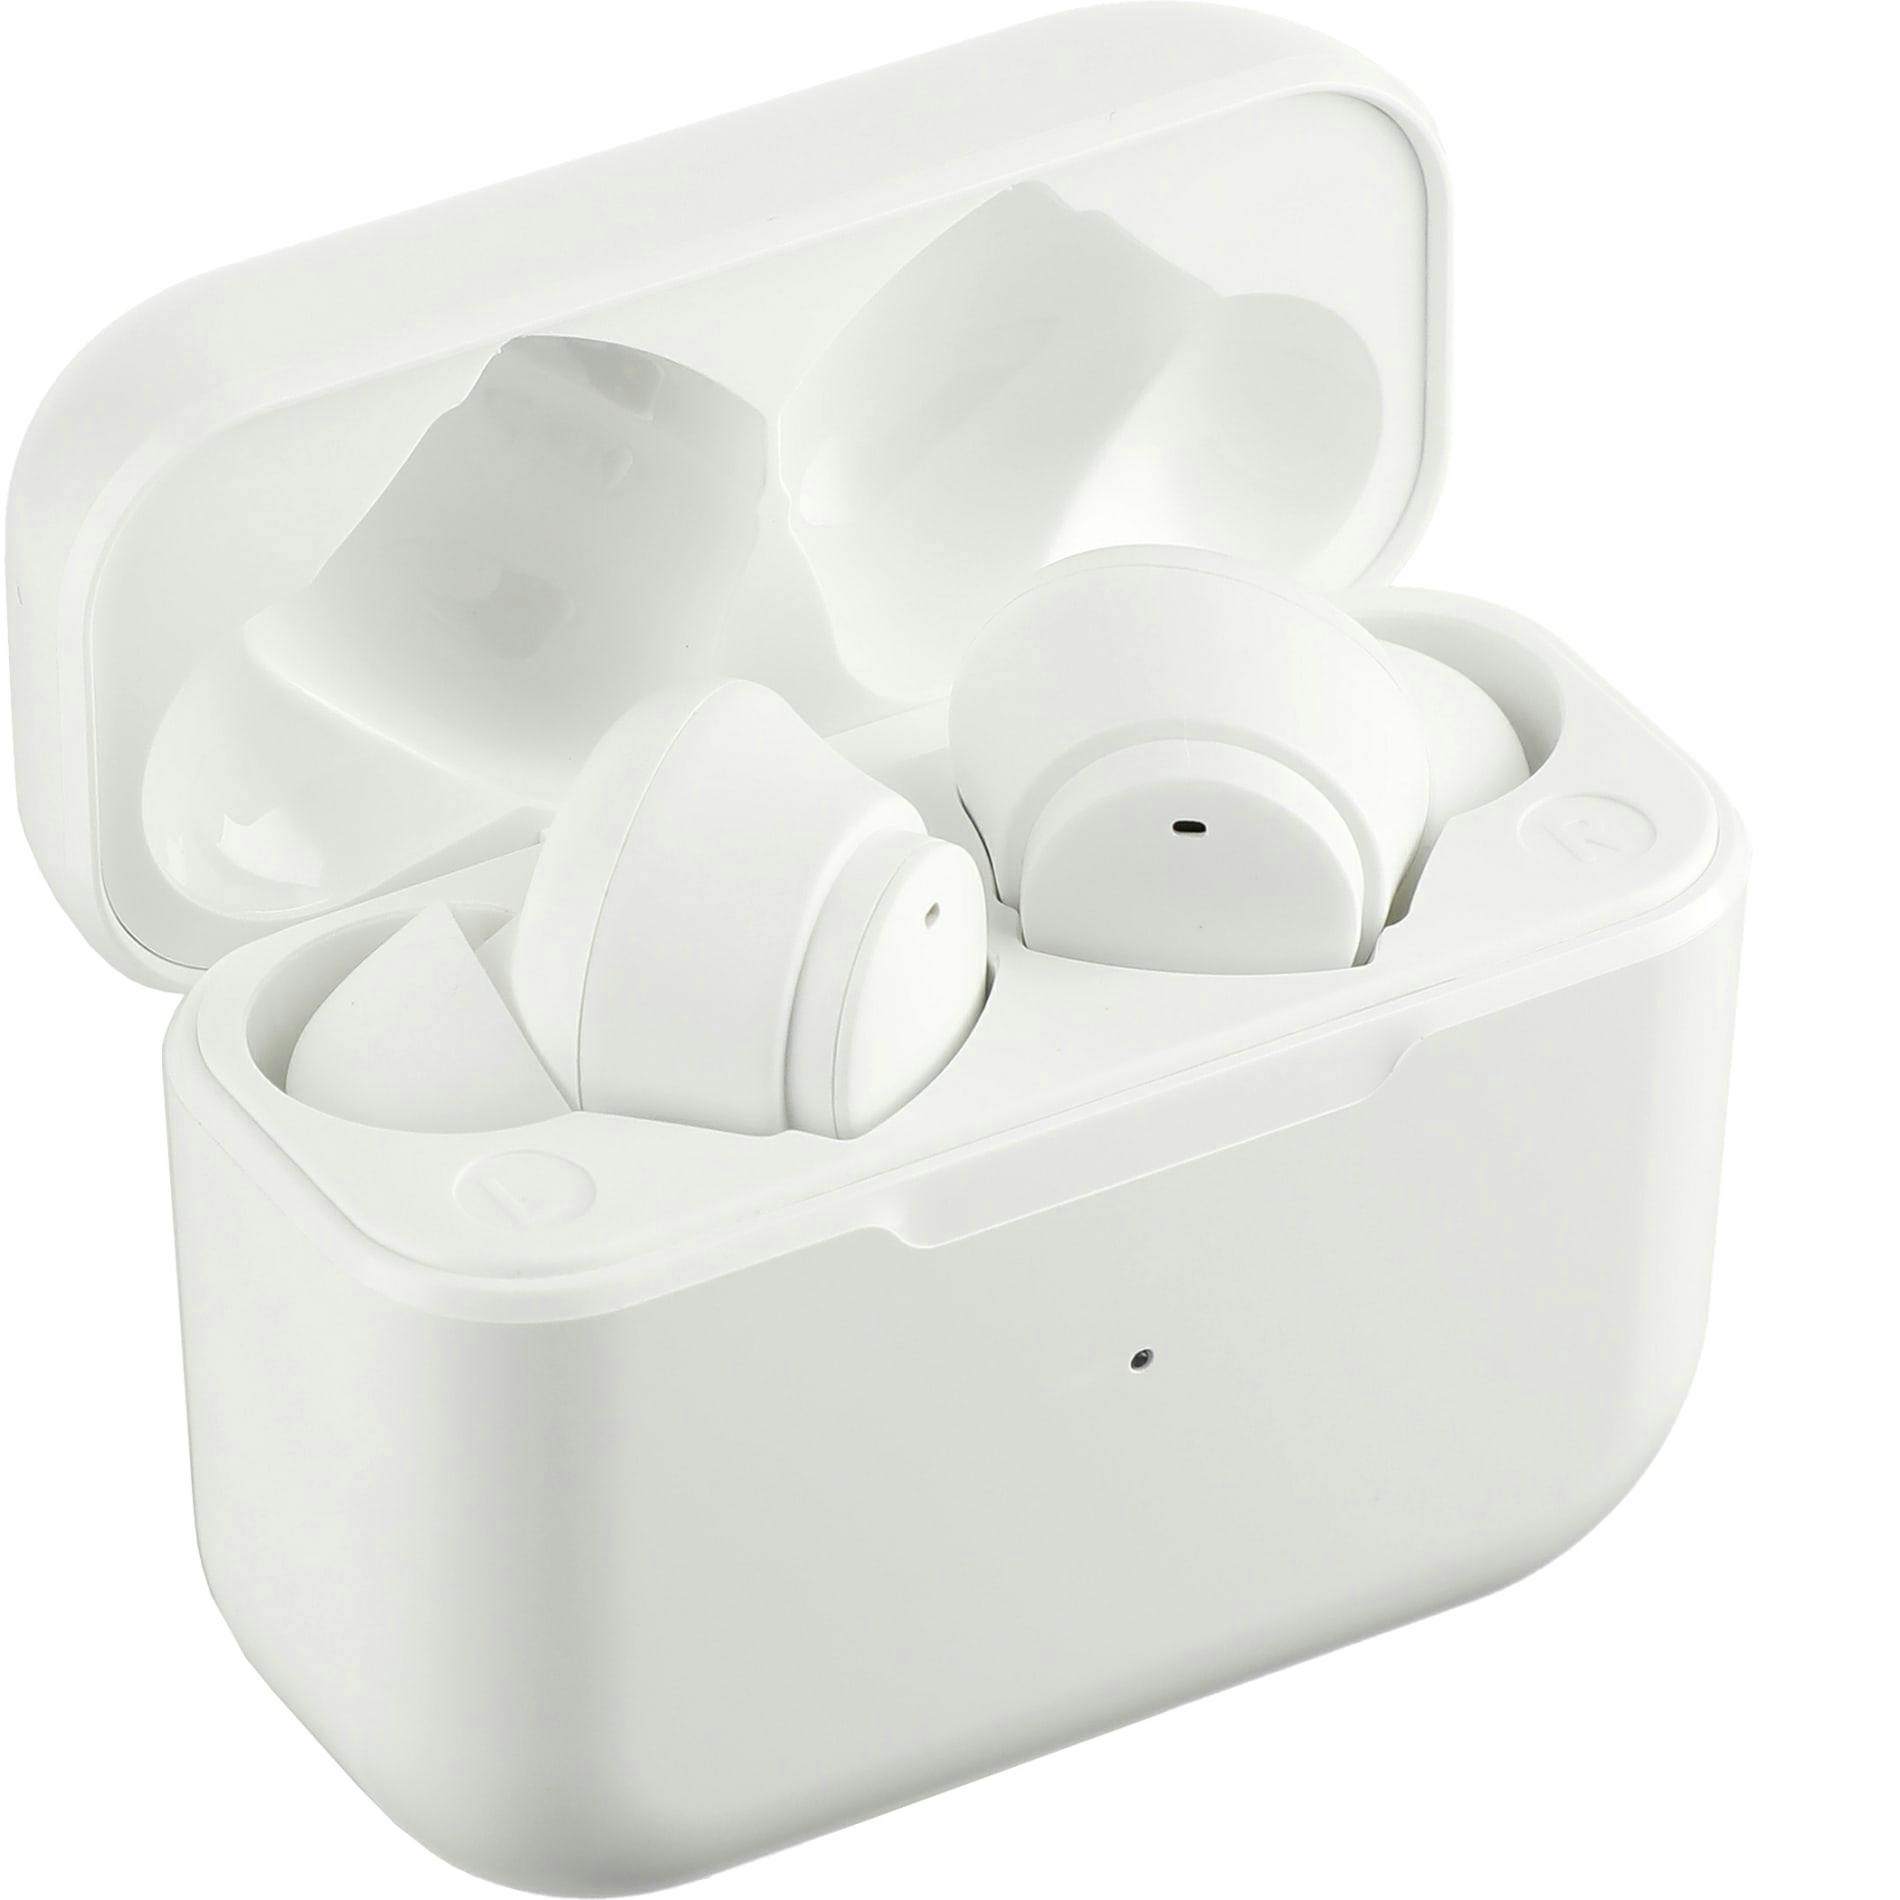 Synergy True Wireless Auto Pair Earbuds with ENC - additional Image 2